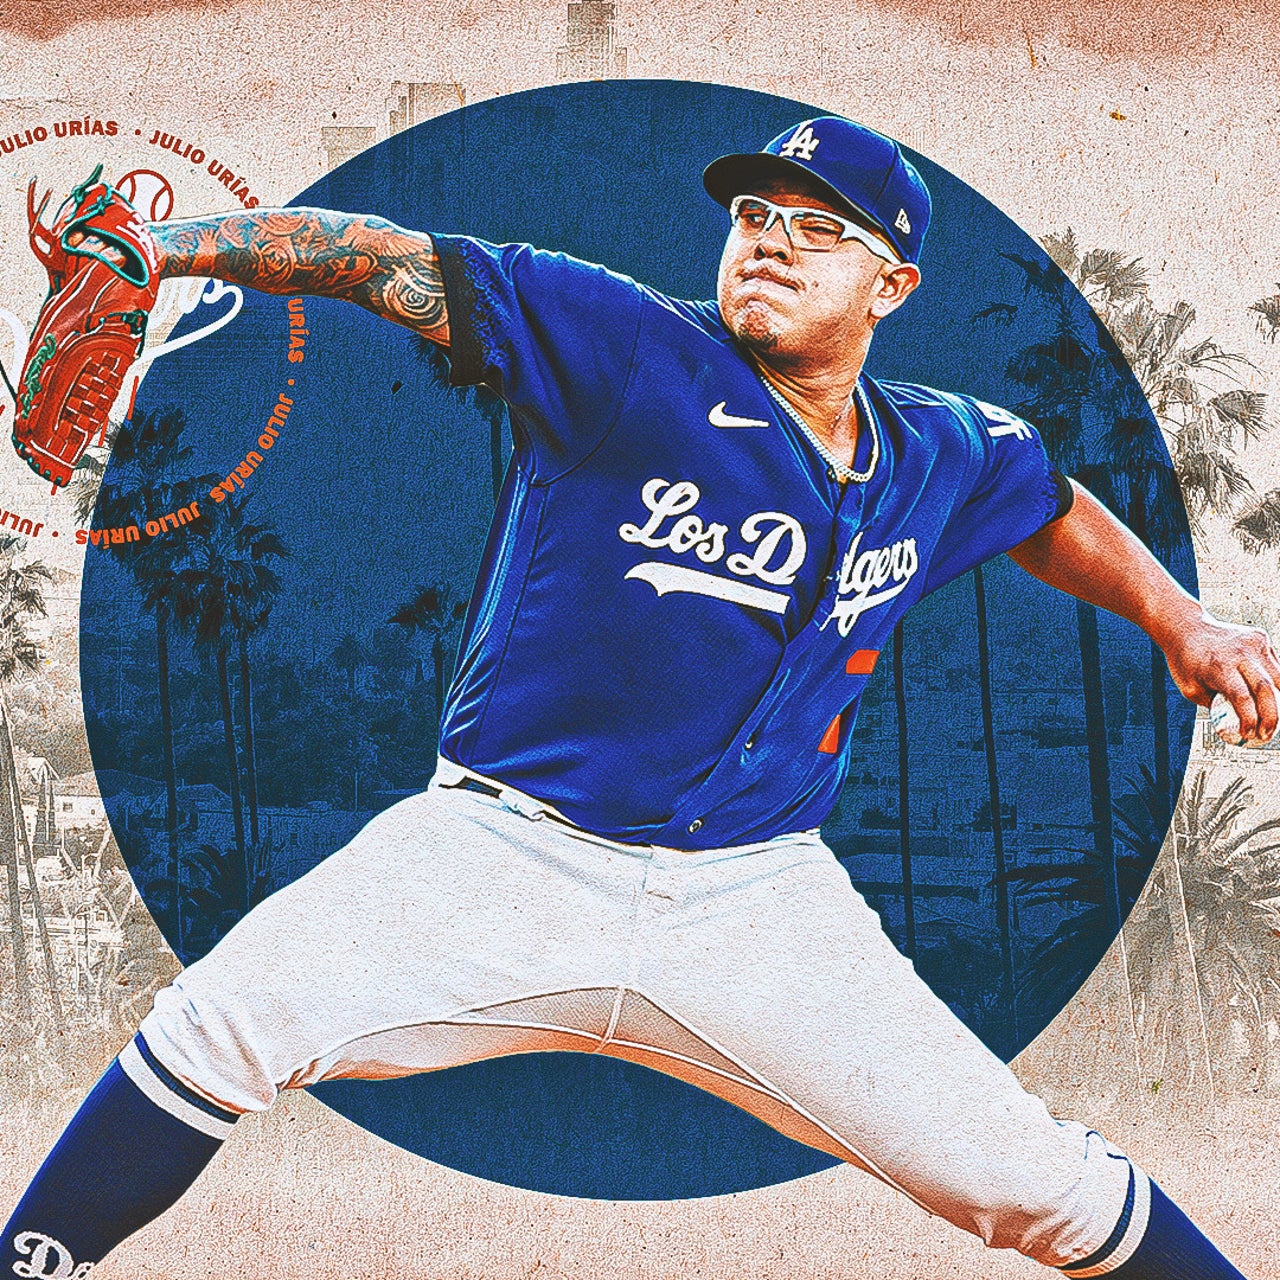 Dodgers' Julio Urias removed from Team Mexico's WBC roster, but